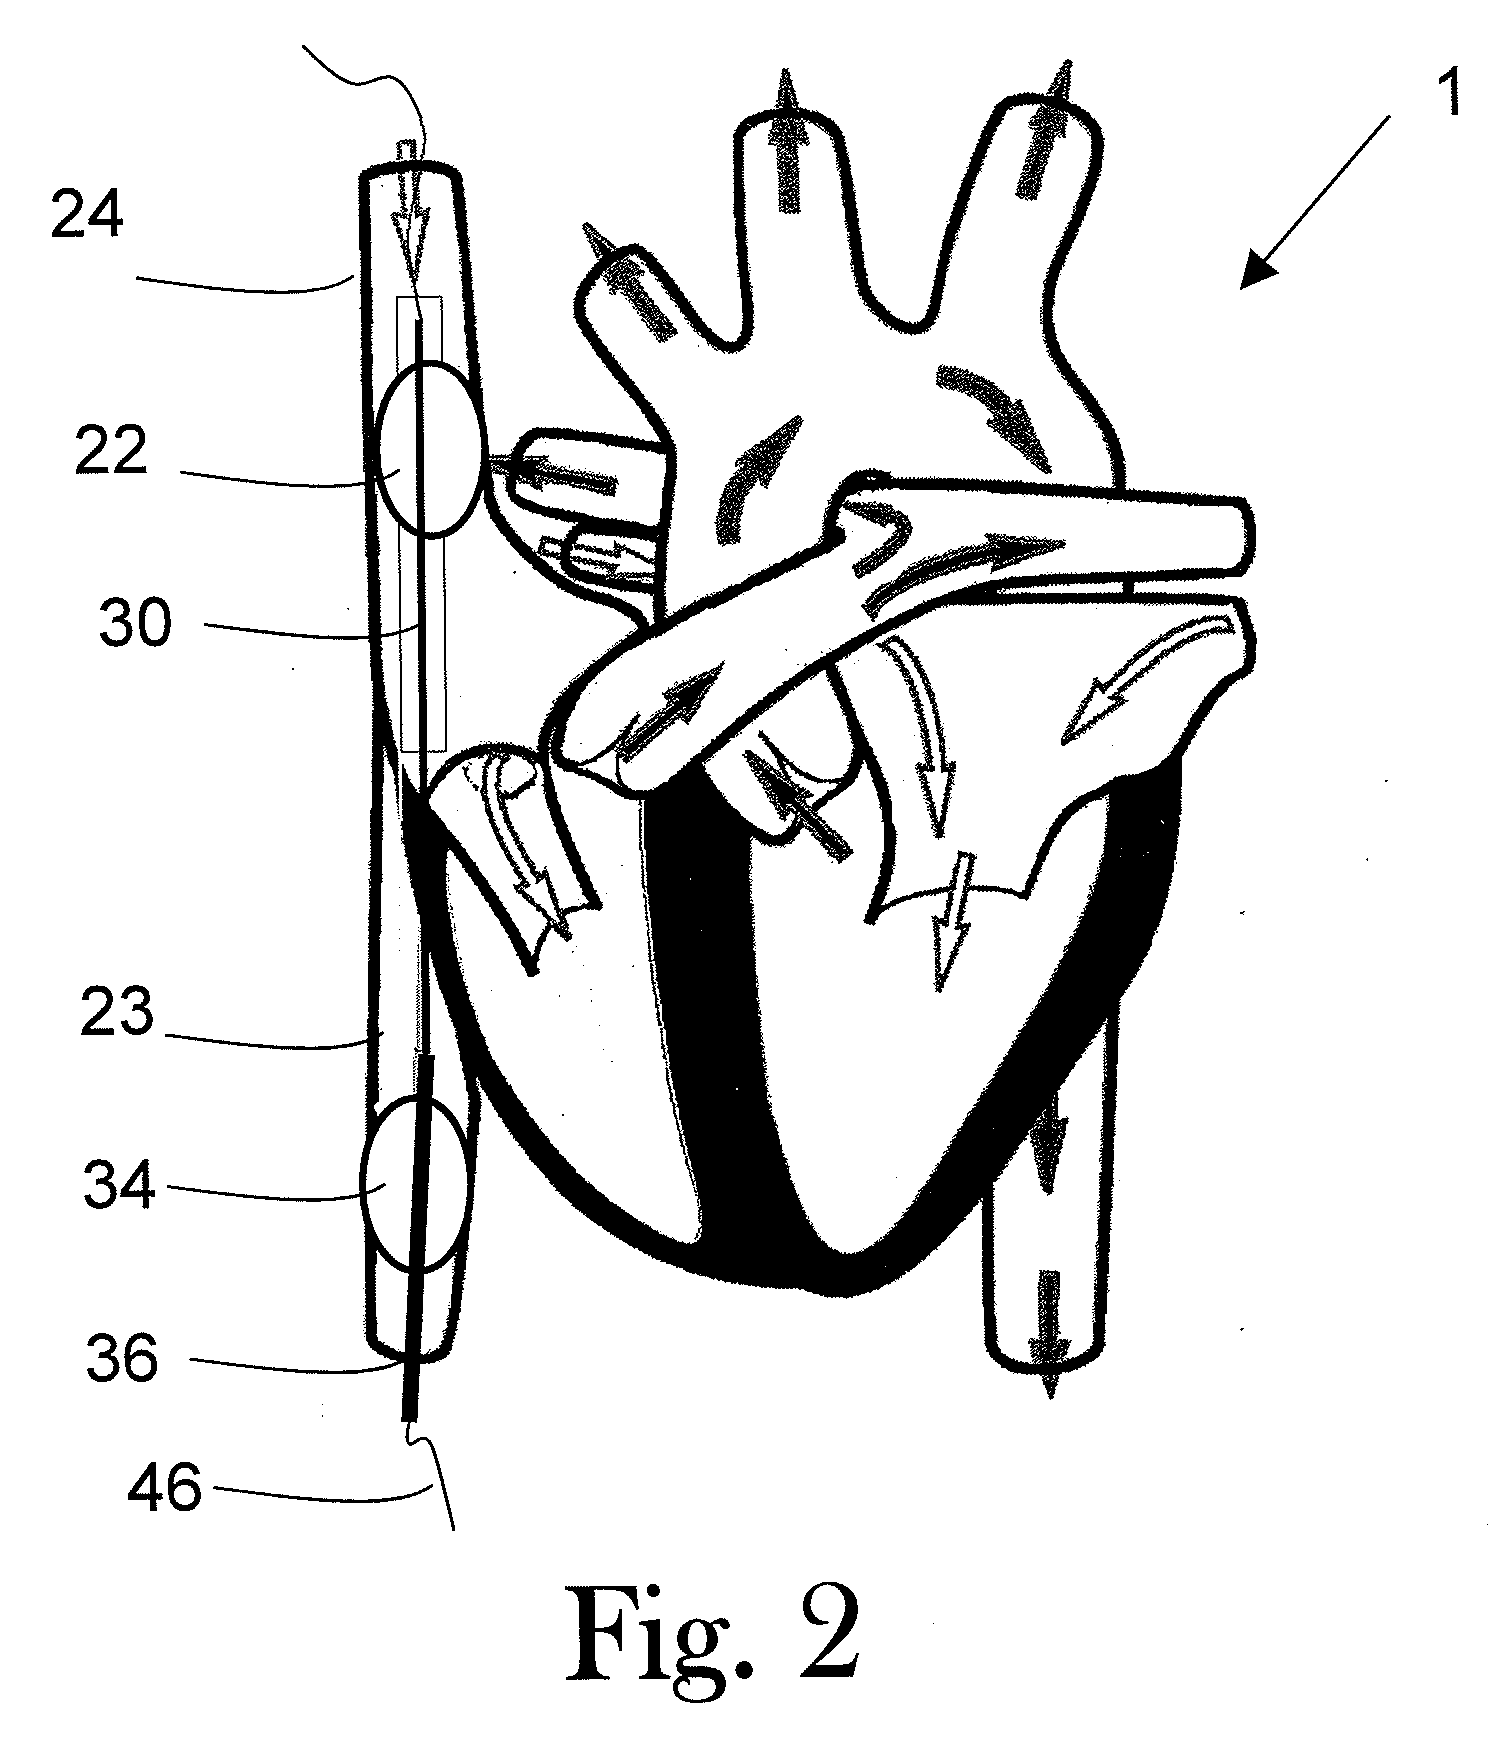 Method for controlling the systemic pressure in cardiac operations